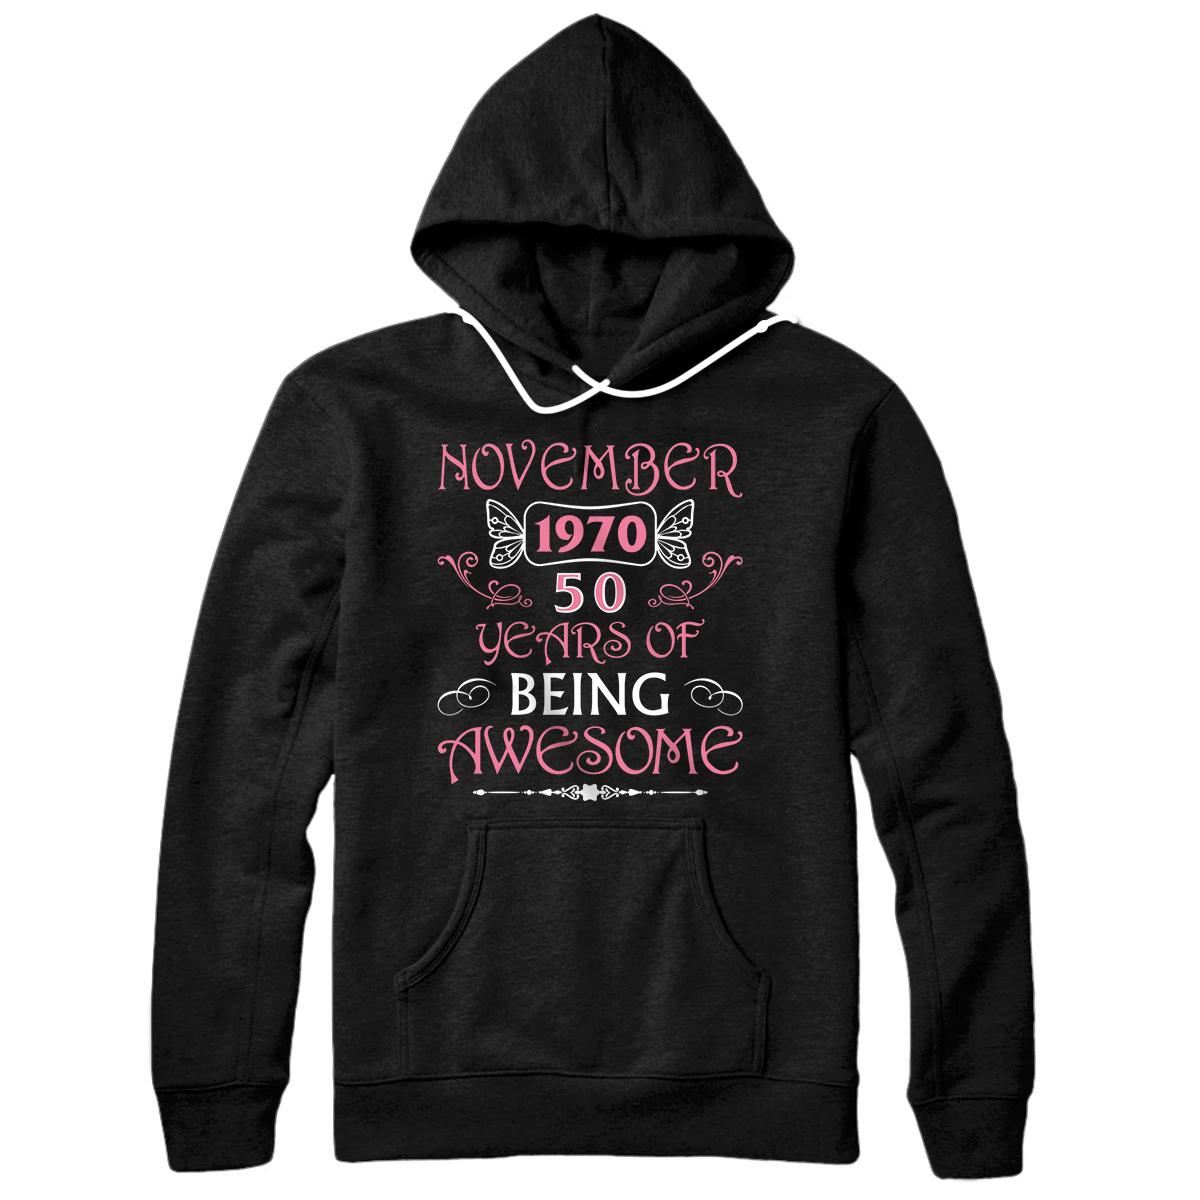 Personalized Awesome 50th Birthday Gifts: Born in November 1970 - 50 Bday Pullover Hoodie